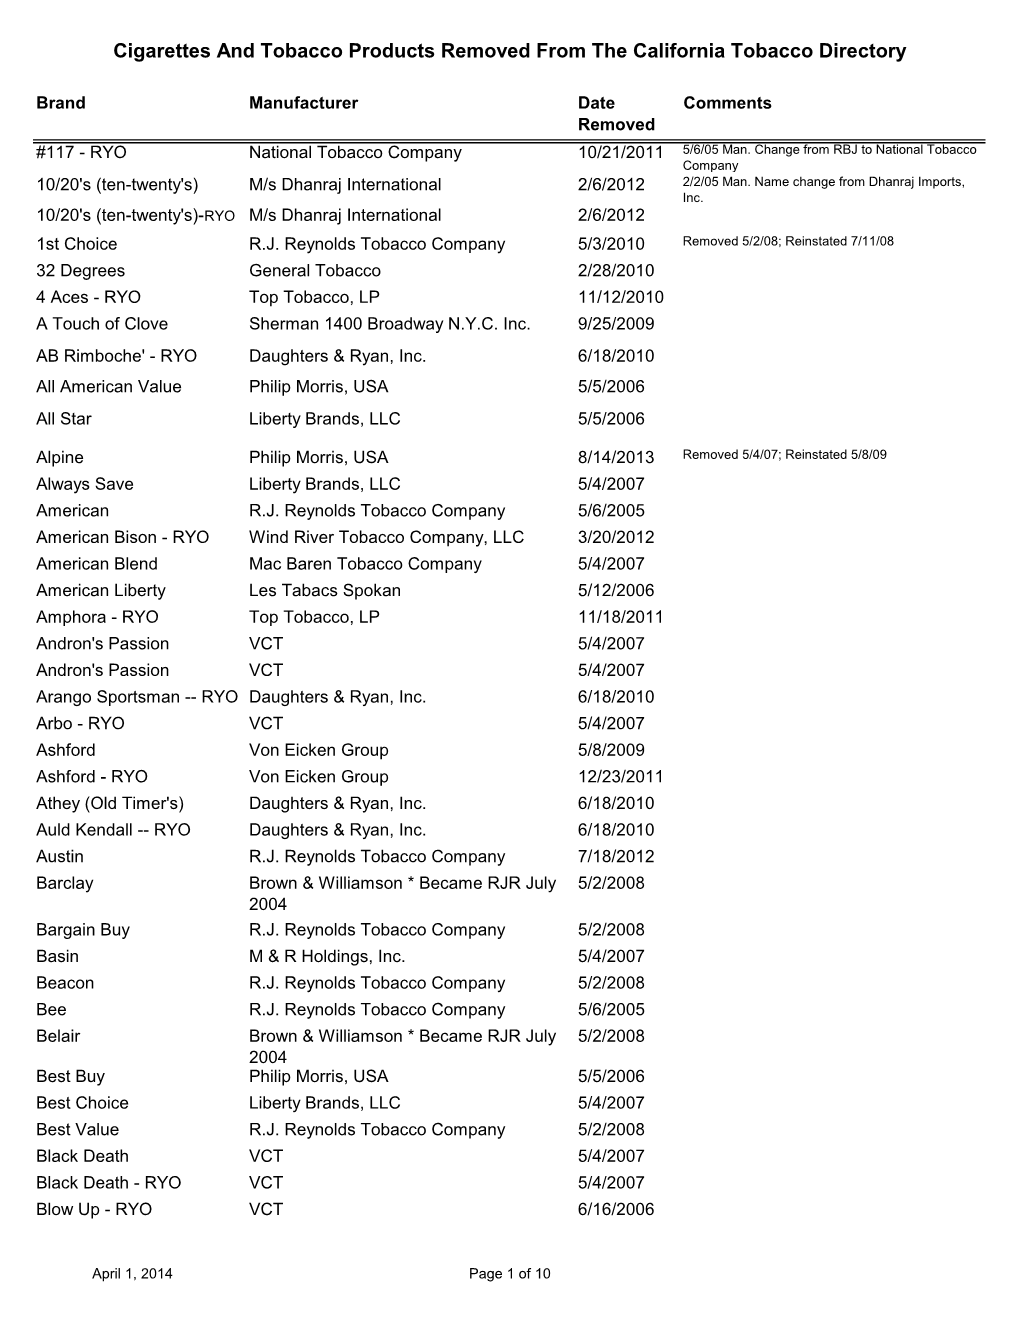 List of Cigarettes and Tobacco Products Removed from The